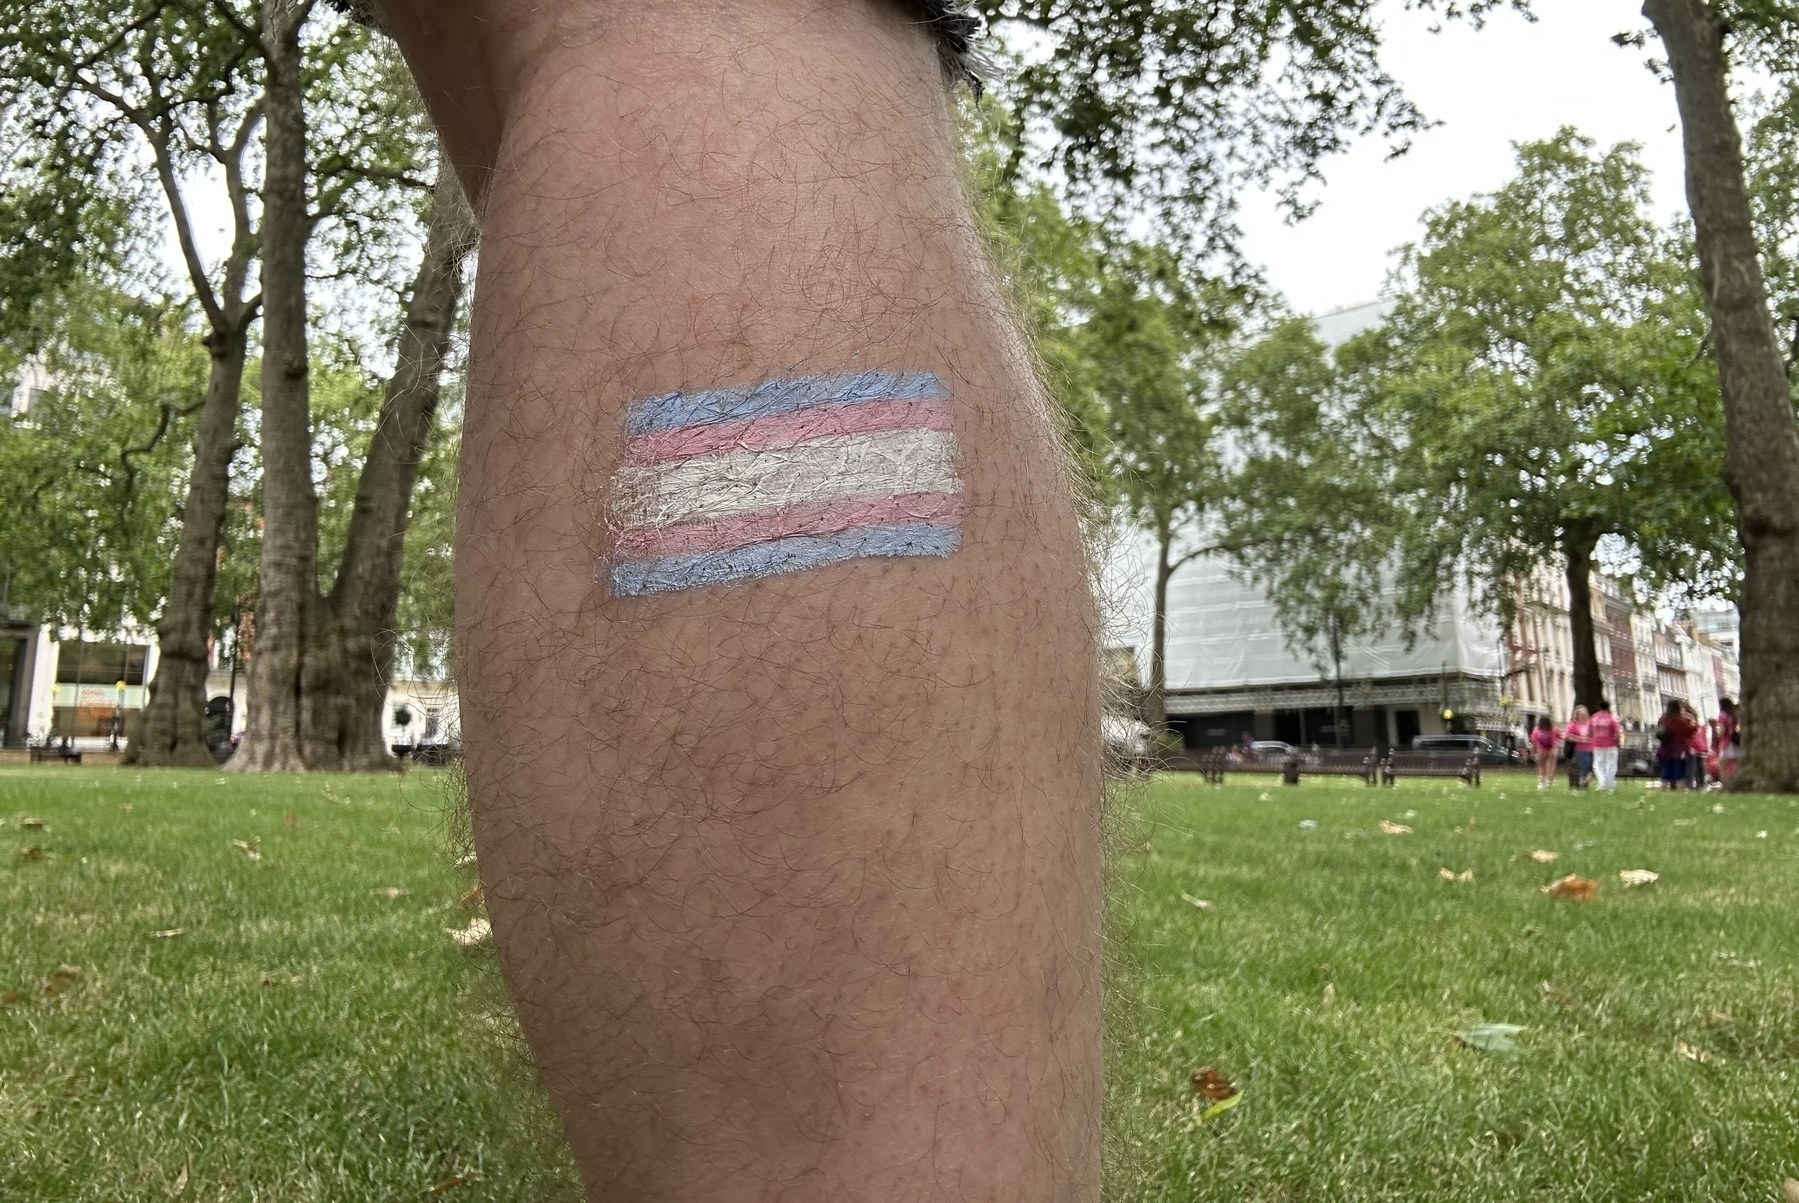 A trans pride flag on the back of a leg, in a park.